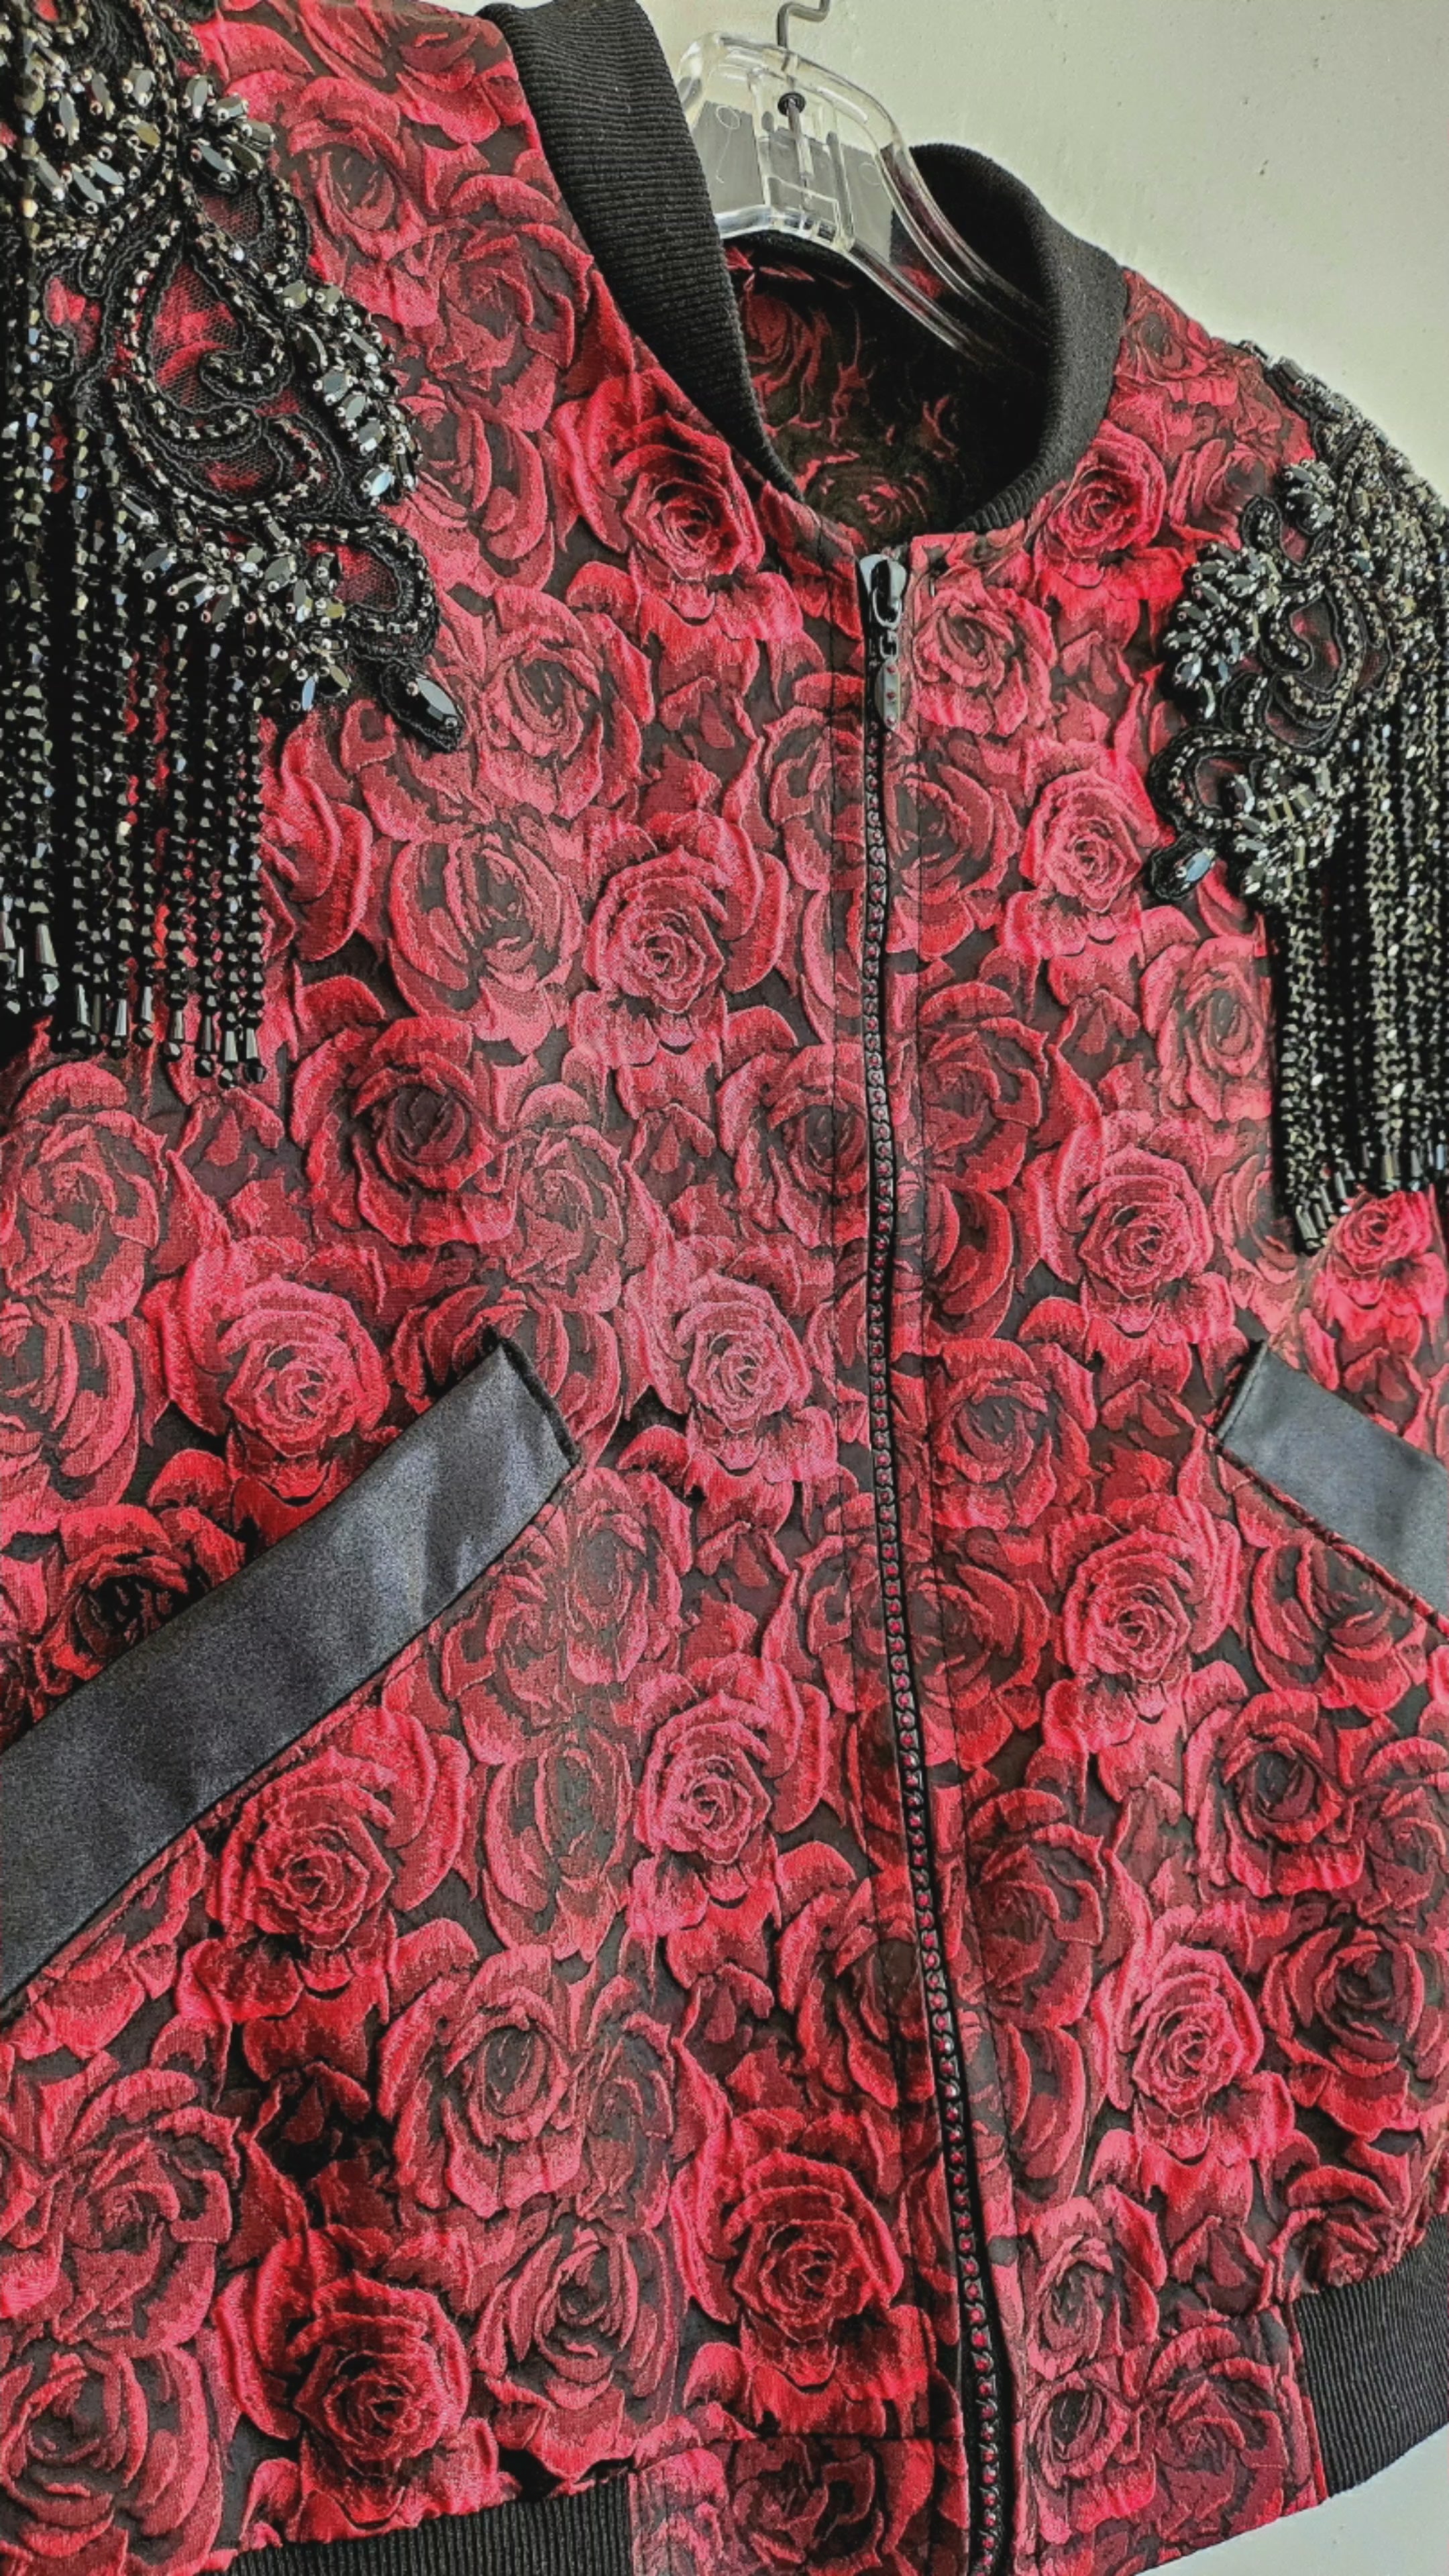  Video of Red rose brocade bomber jacket with rhinestone appliqued shoulders with beaded fringe.